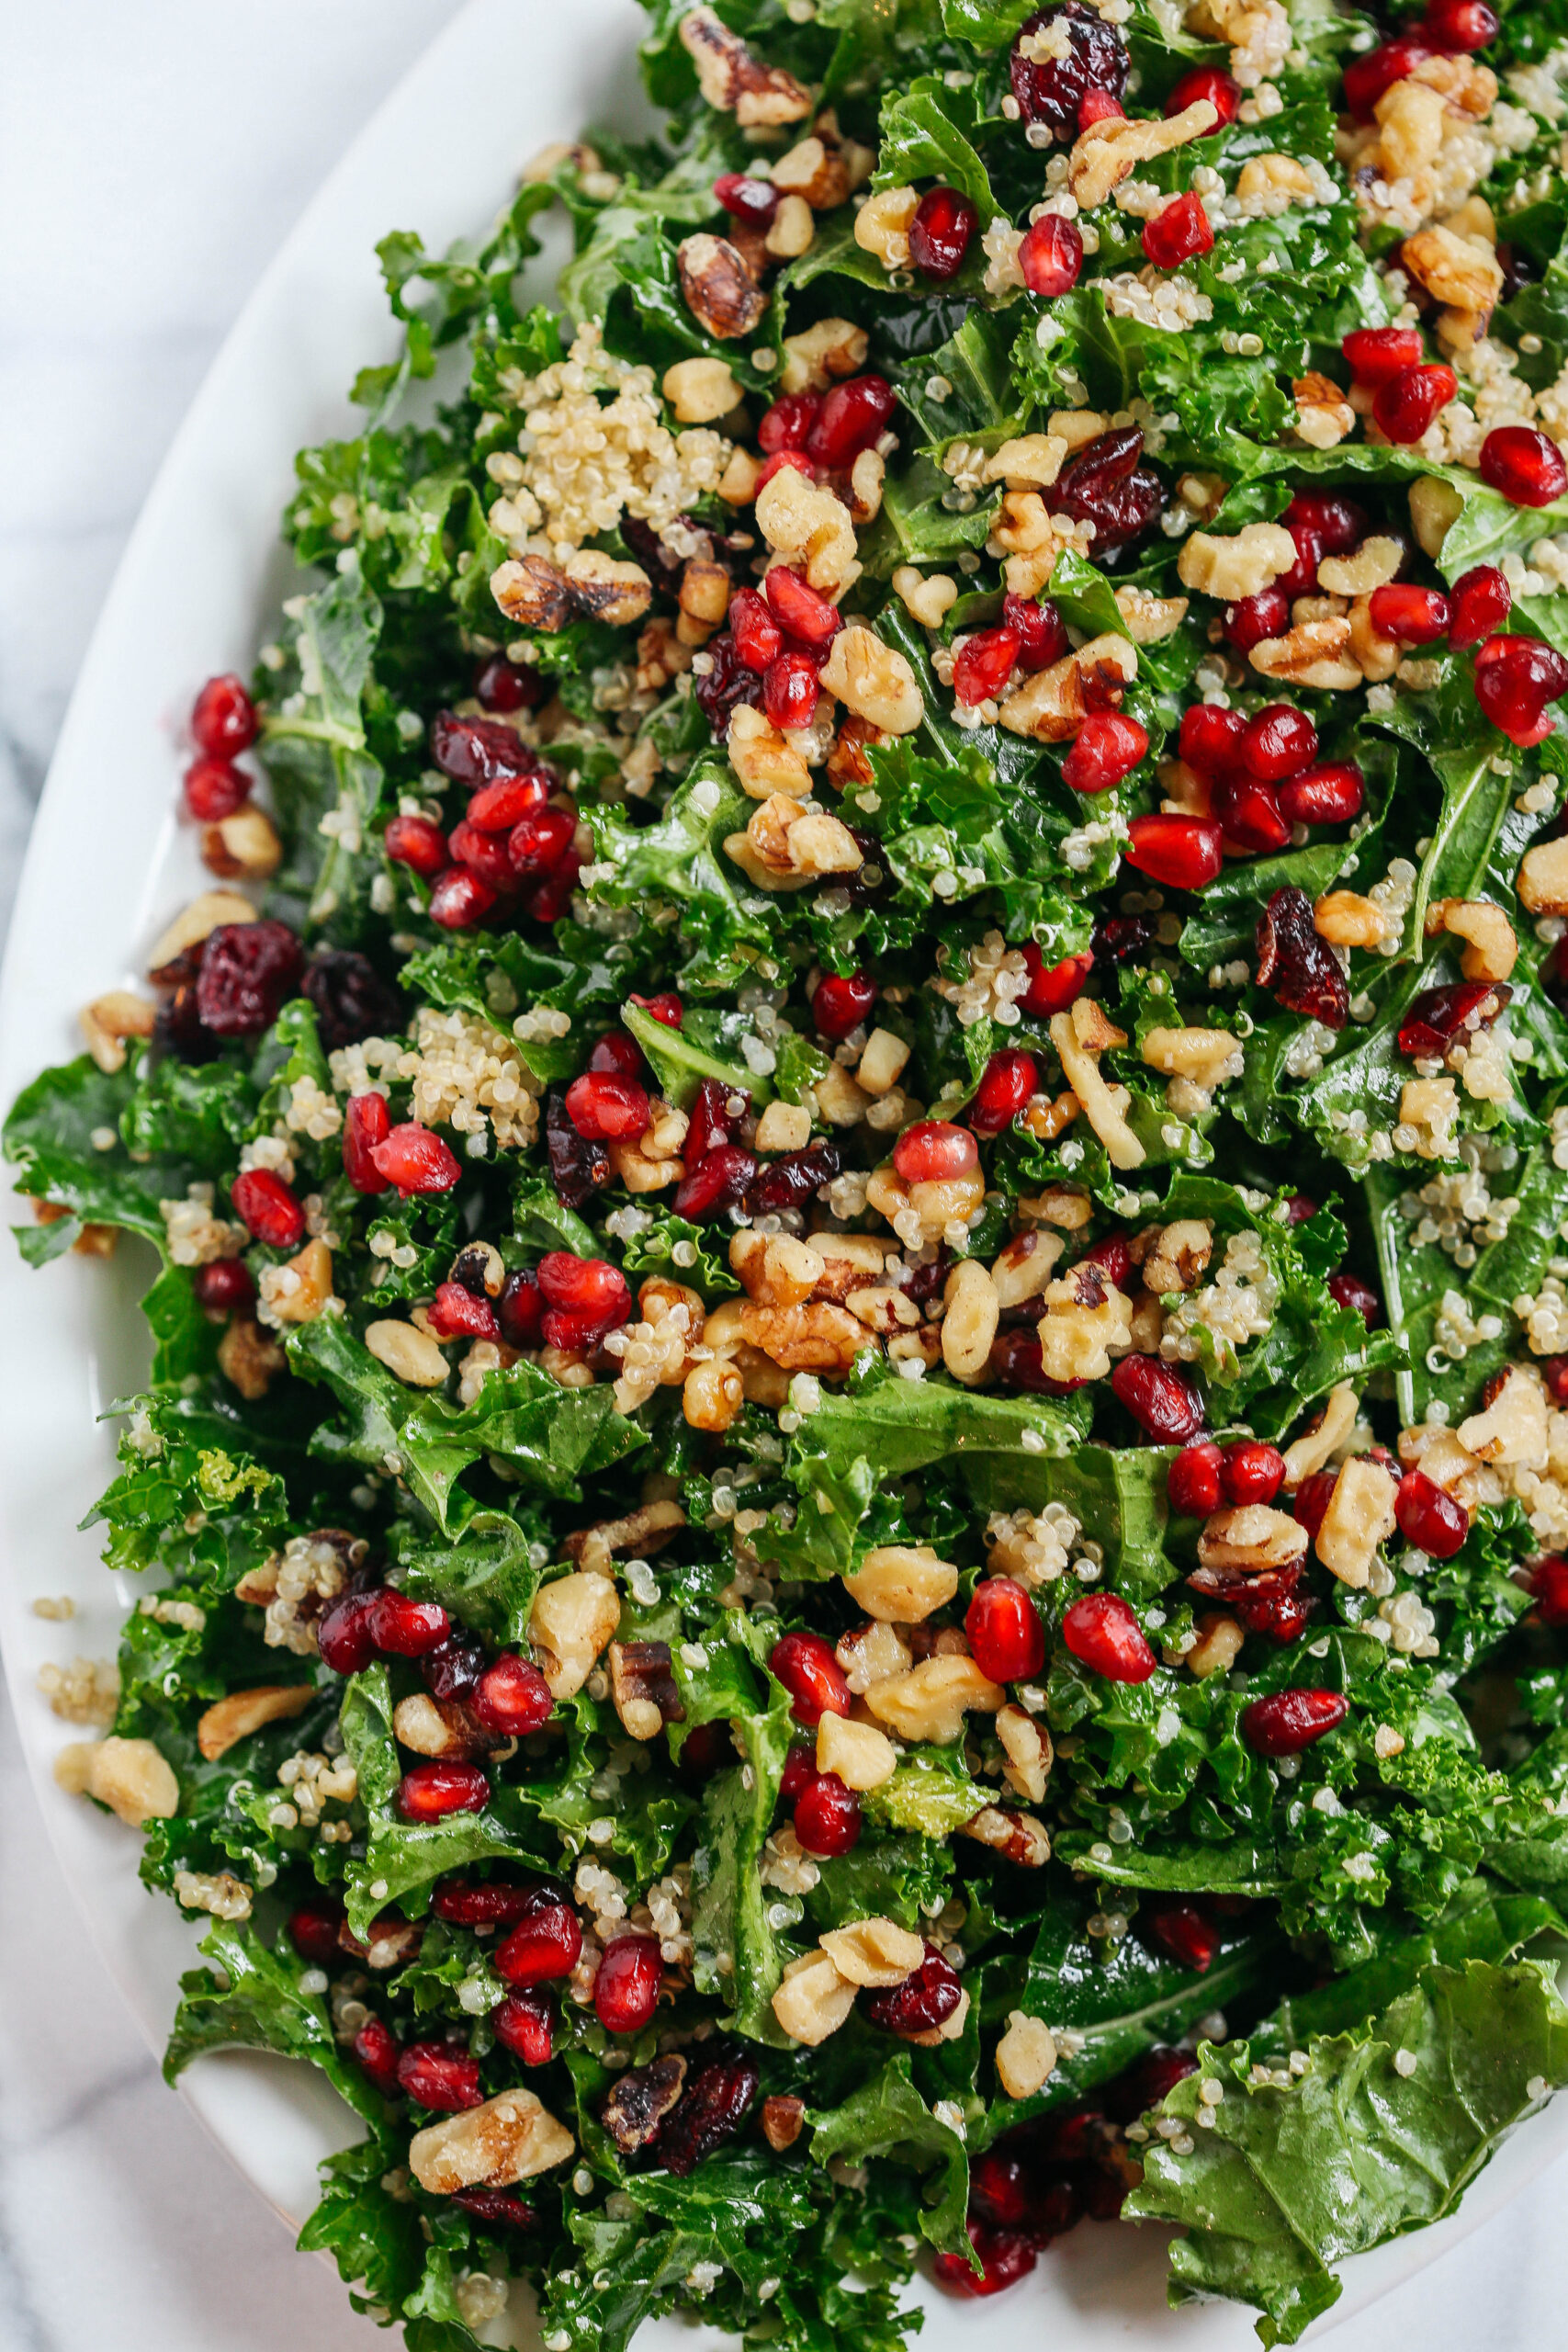 This Winter Kale and Quinoa Salad makes the perfect healthy holiday side dish that is sweet, crunchy and super easy to make!